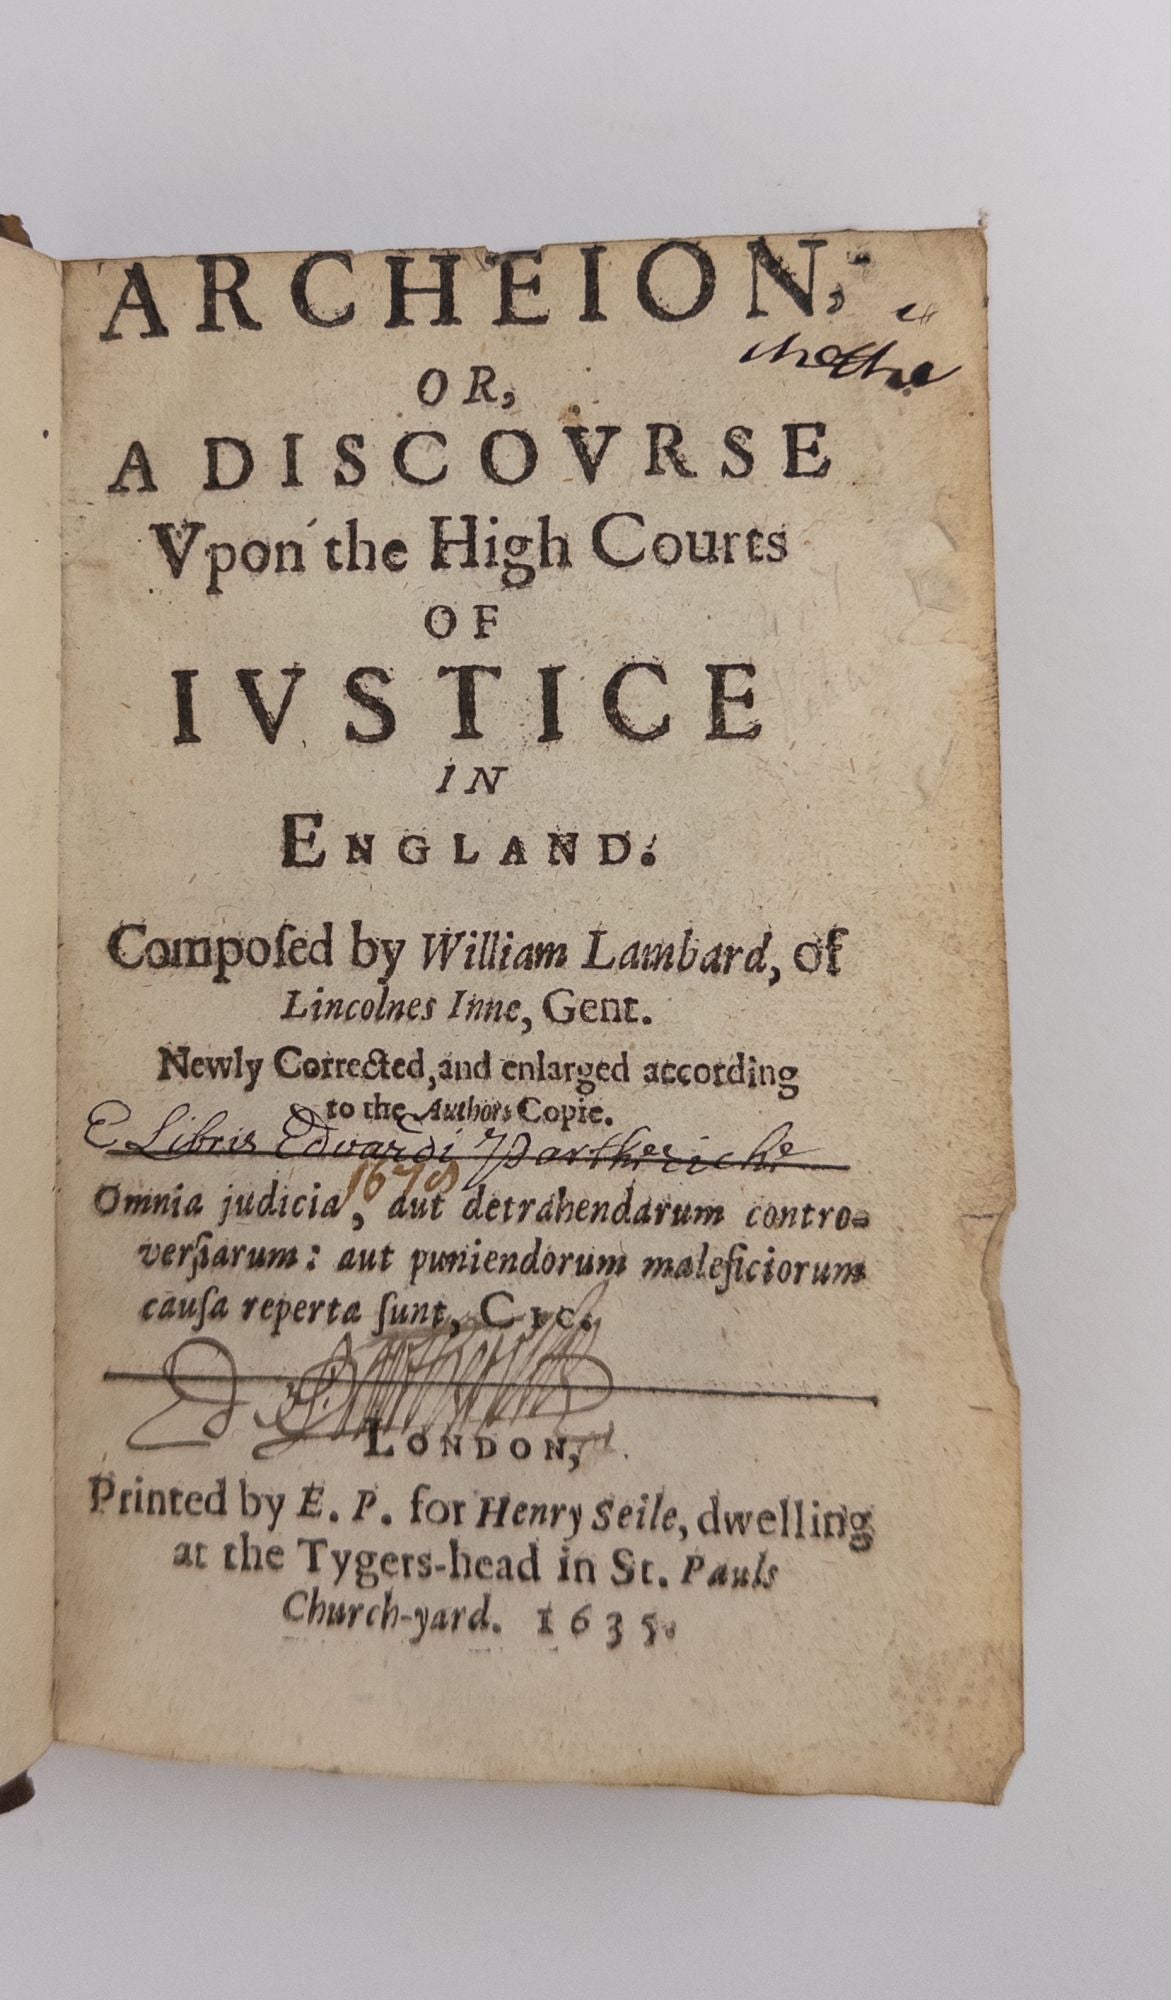 Product Image for ARCHEION, OR, A DISCOURSE UPON THE HIGH COURTS OF JUSTICE IN ENGLAND. COMPOSED BY WILLIAM LAMBARD, OF LINCOLNES INNE, GENT. NEWLY CORRECTED, AND ENLARGED ACCORDING TO THE AUTHOR'S COPIE